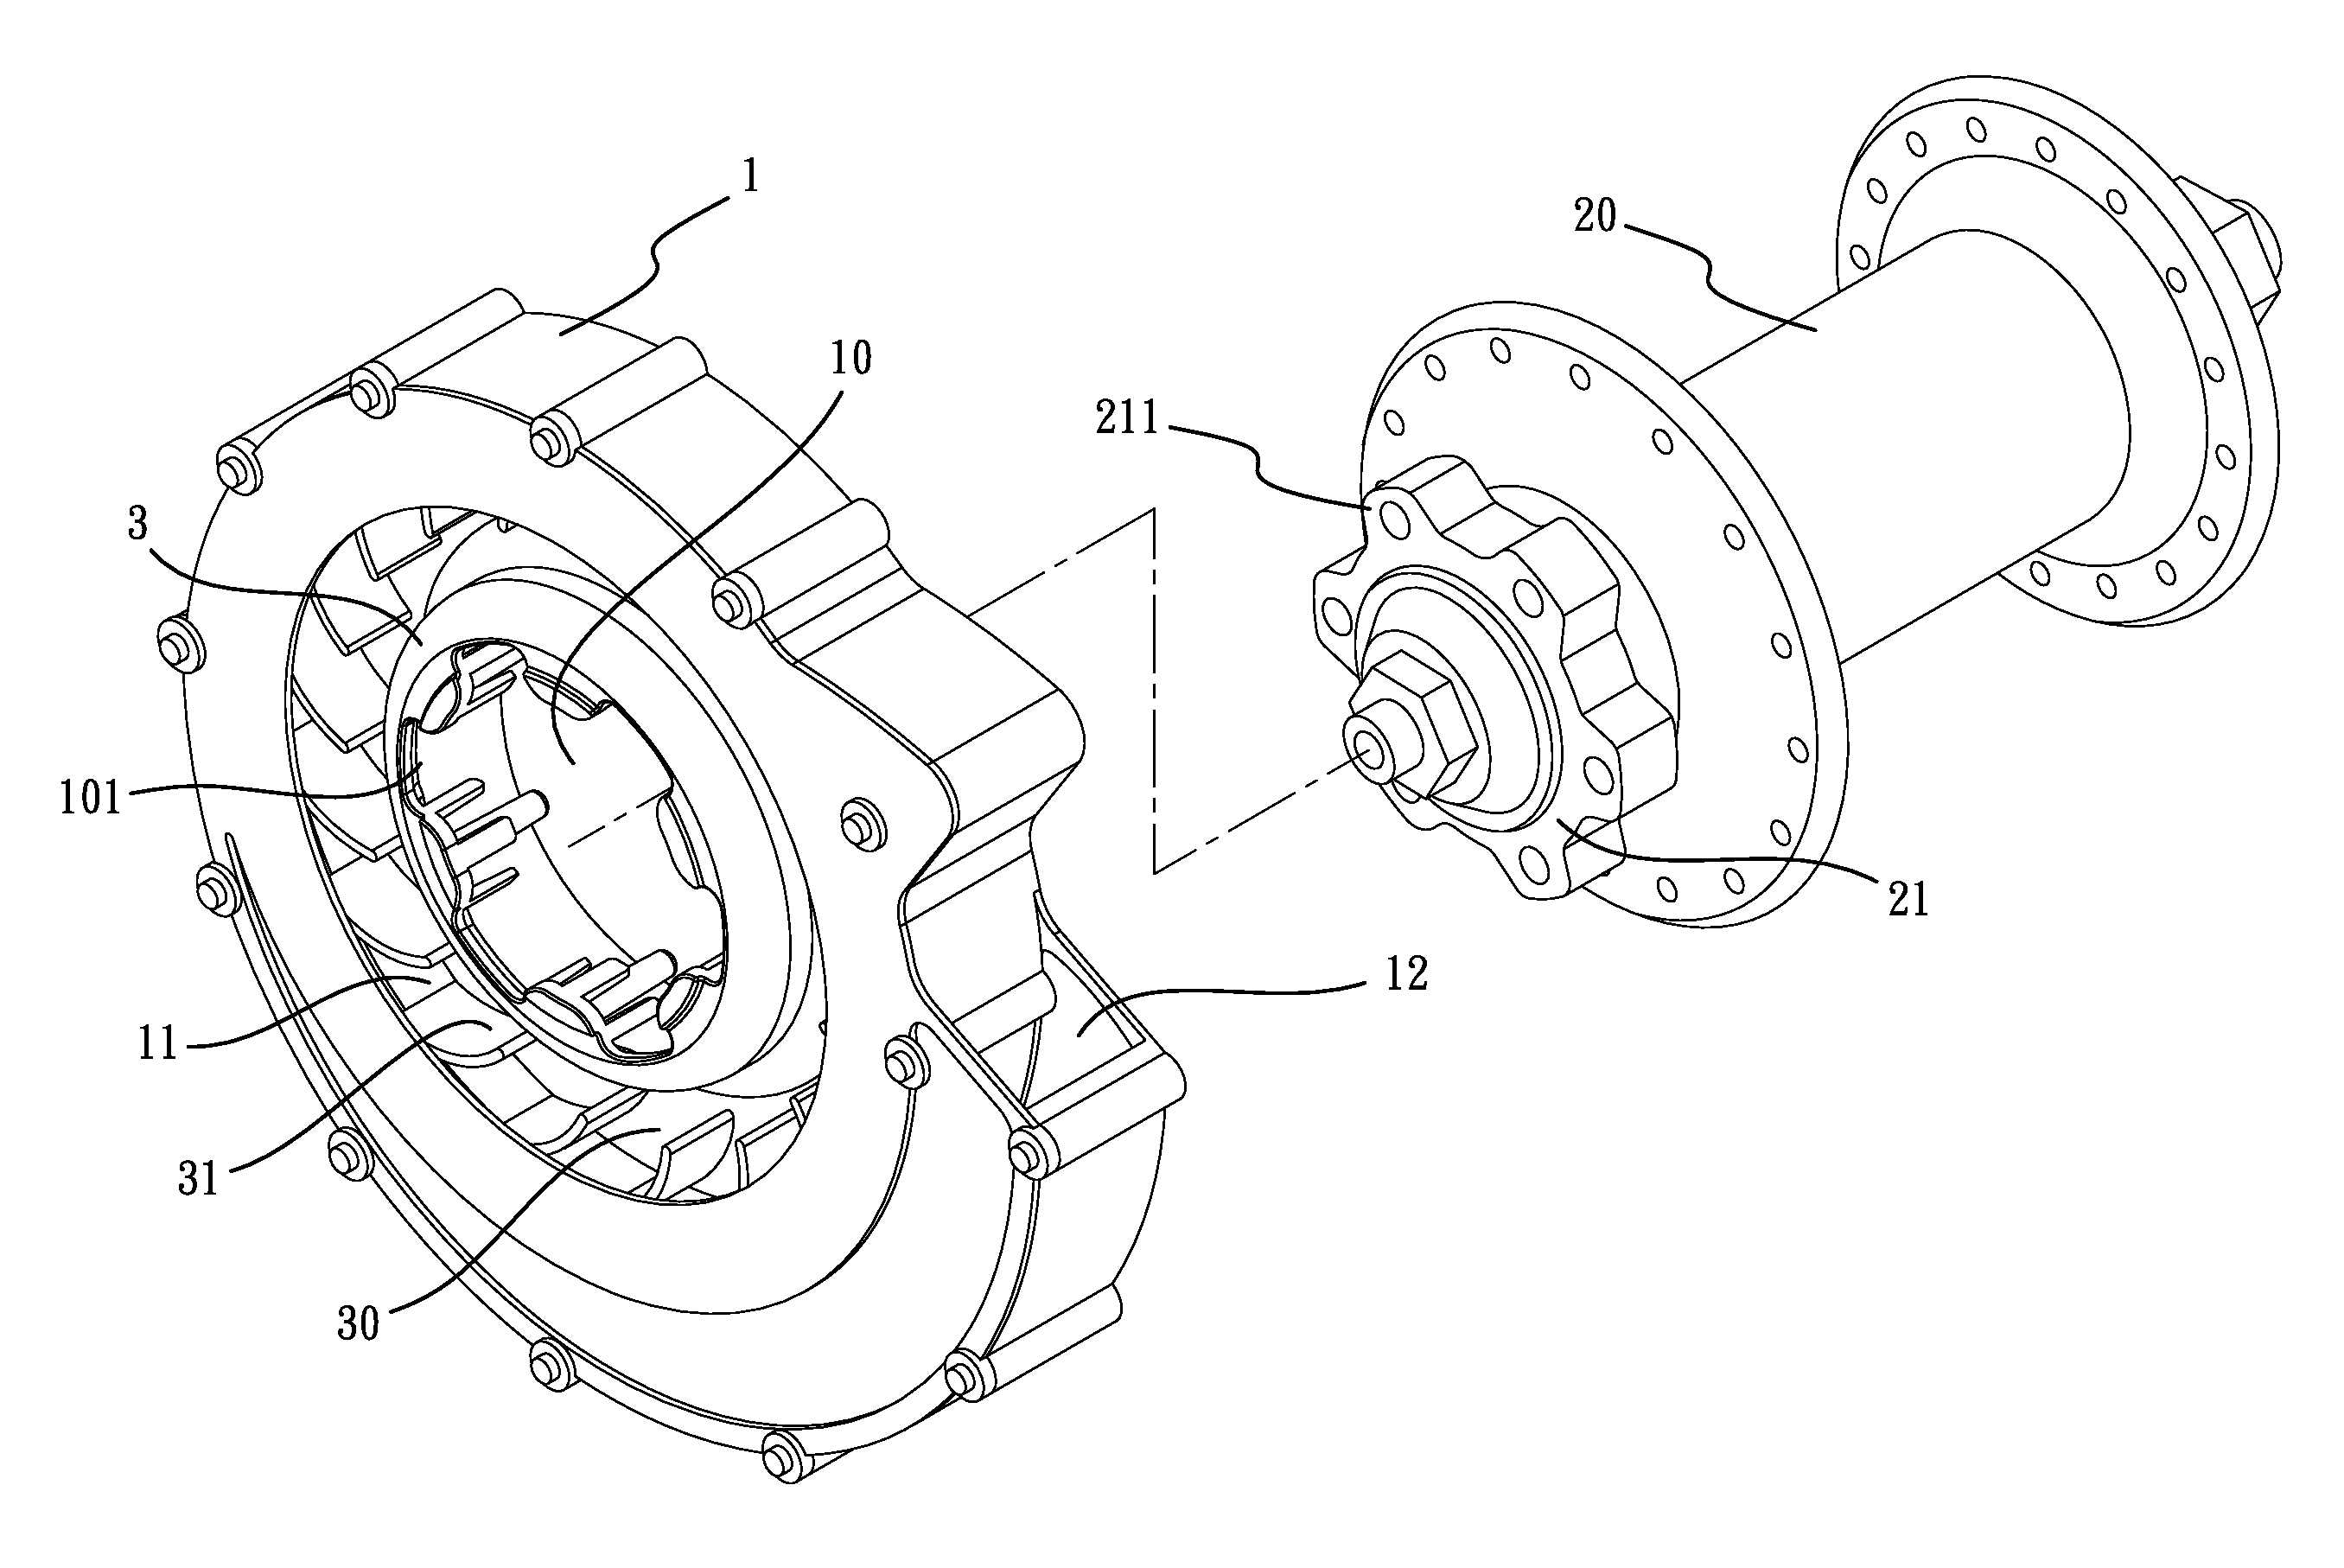 Positioning mechanism for a bicycle cooling device